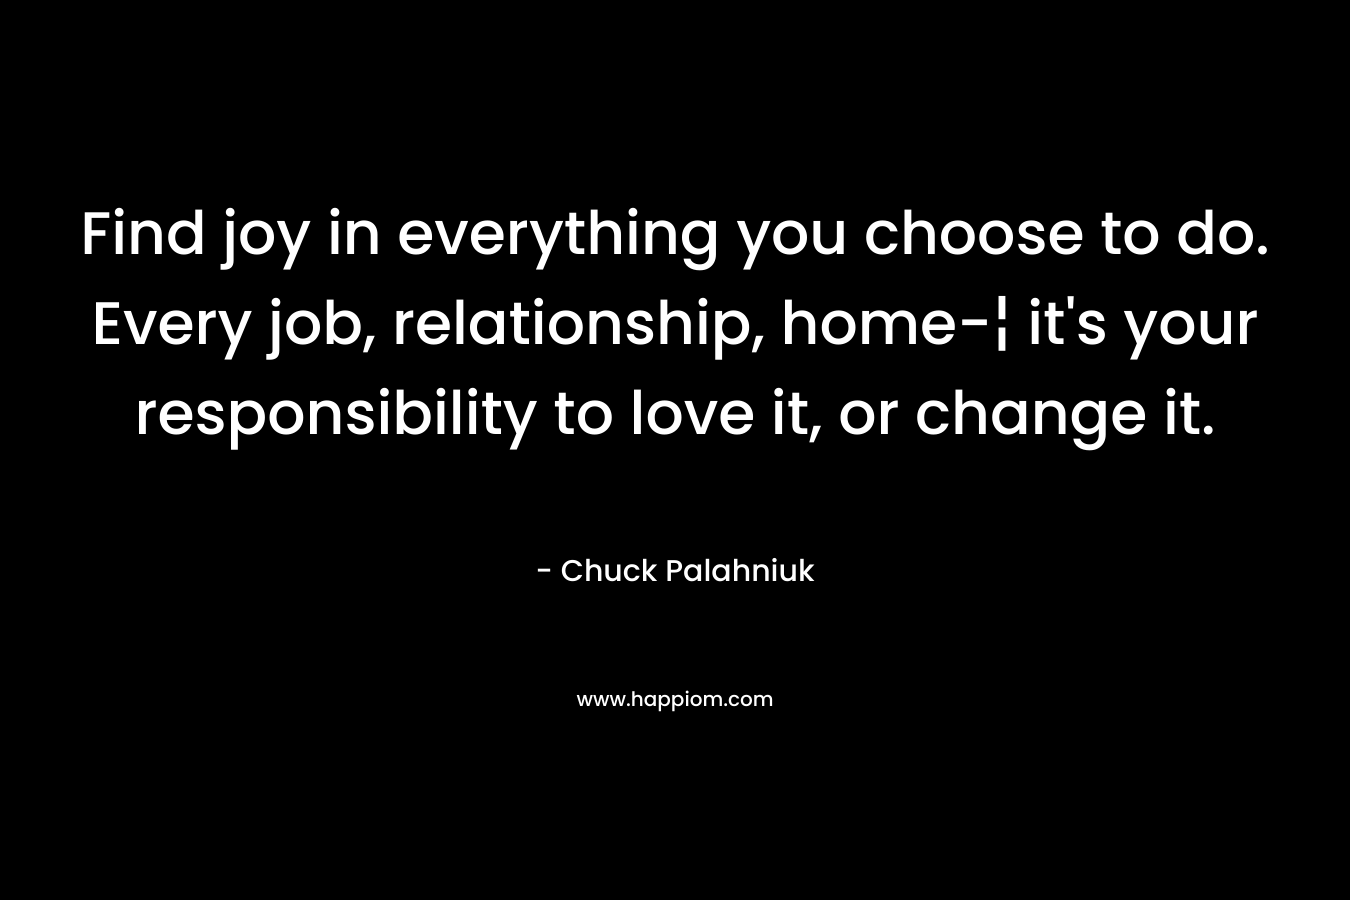 Find joy in everything you choose to do. Every job, relationship, home-¦ it's your responsibility to love it, or change it.